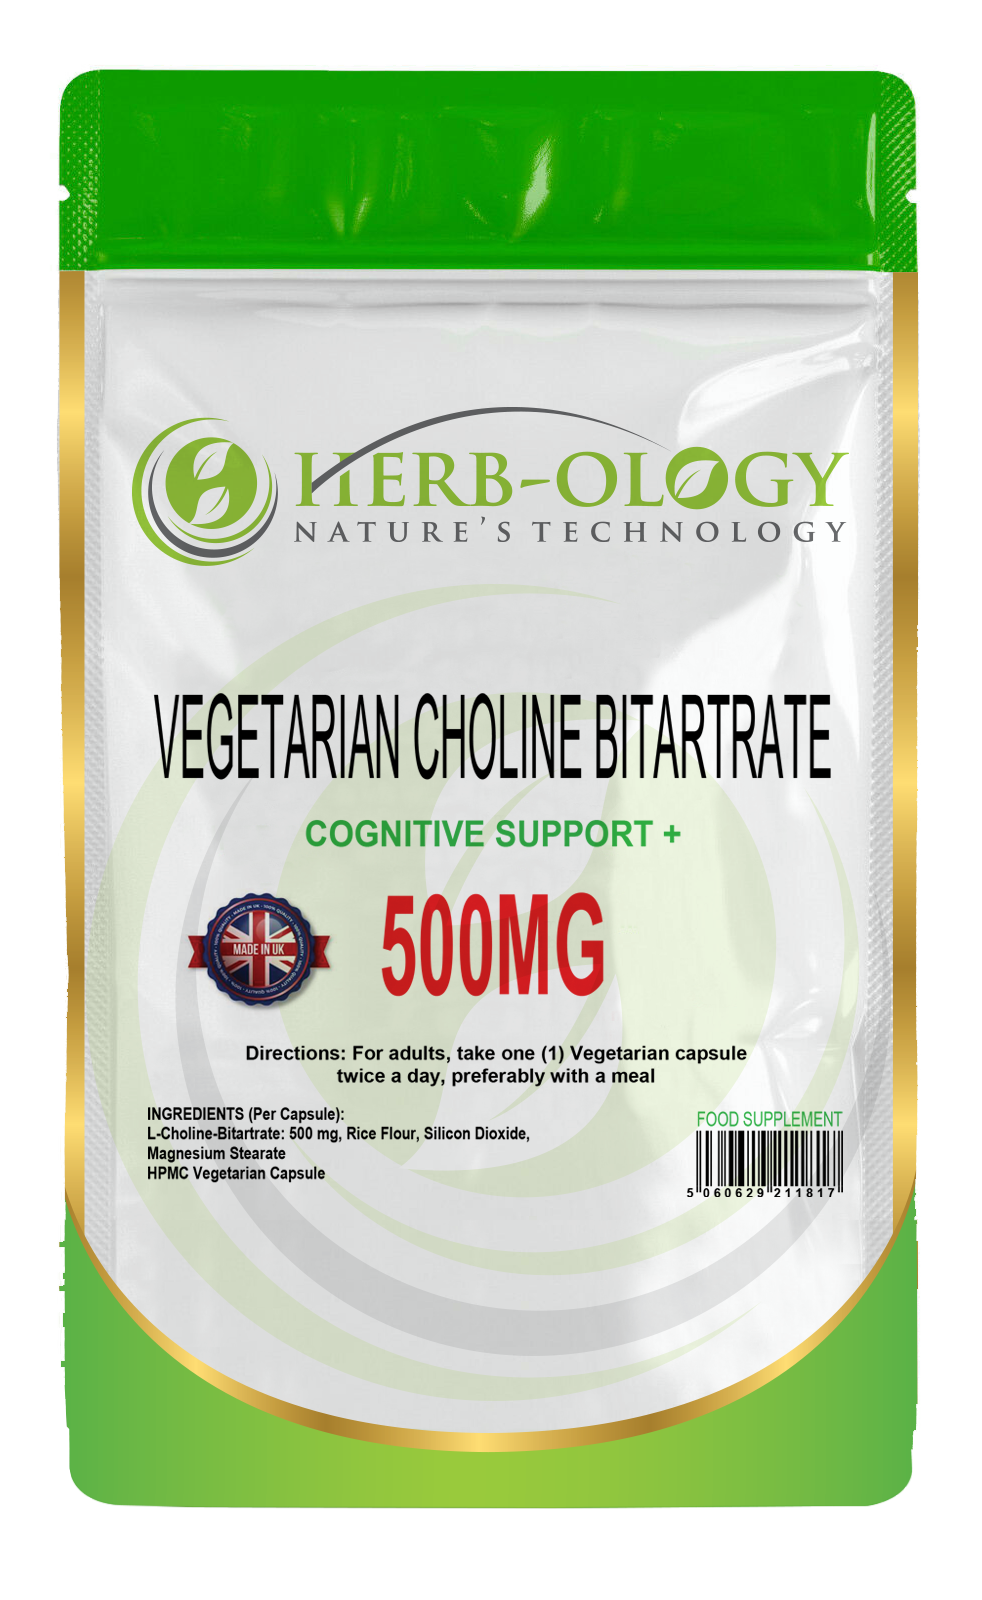 Choline Bitartrate 500mg Vegetarian Capsules For Cognitive Support